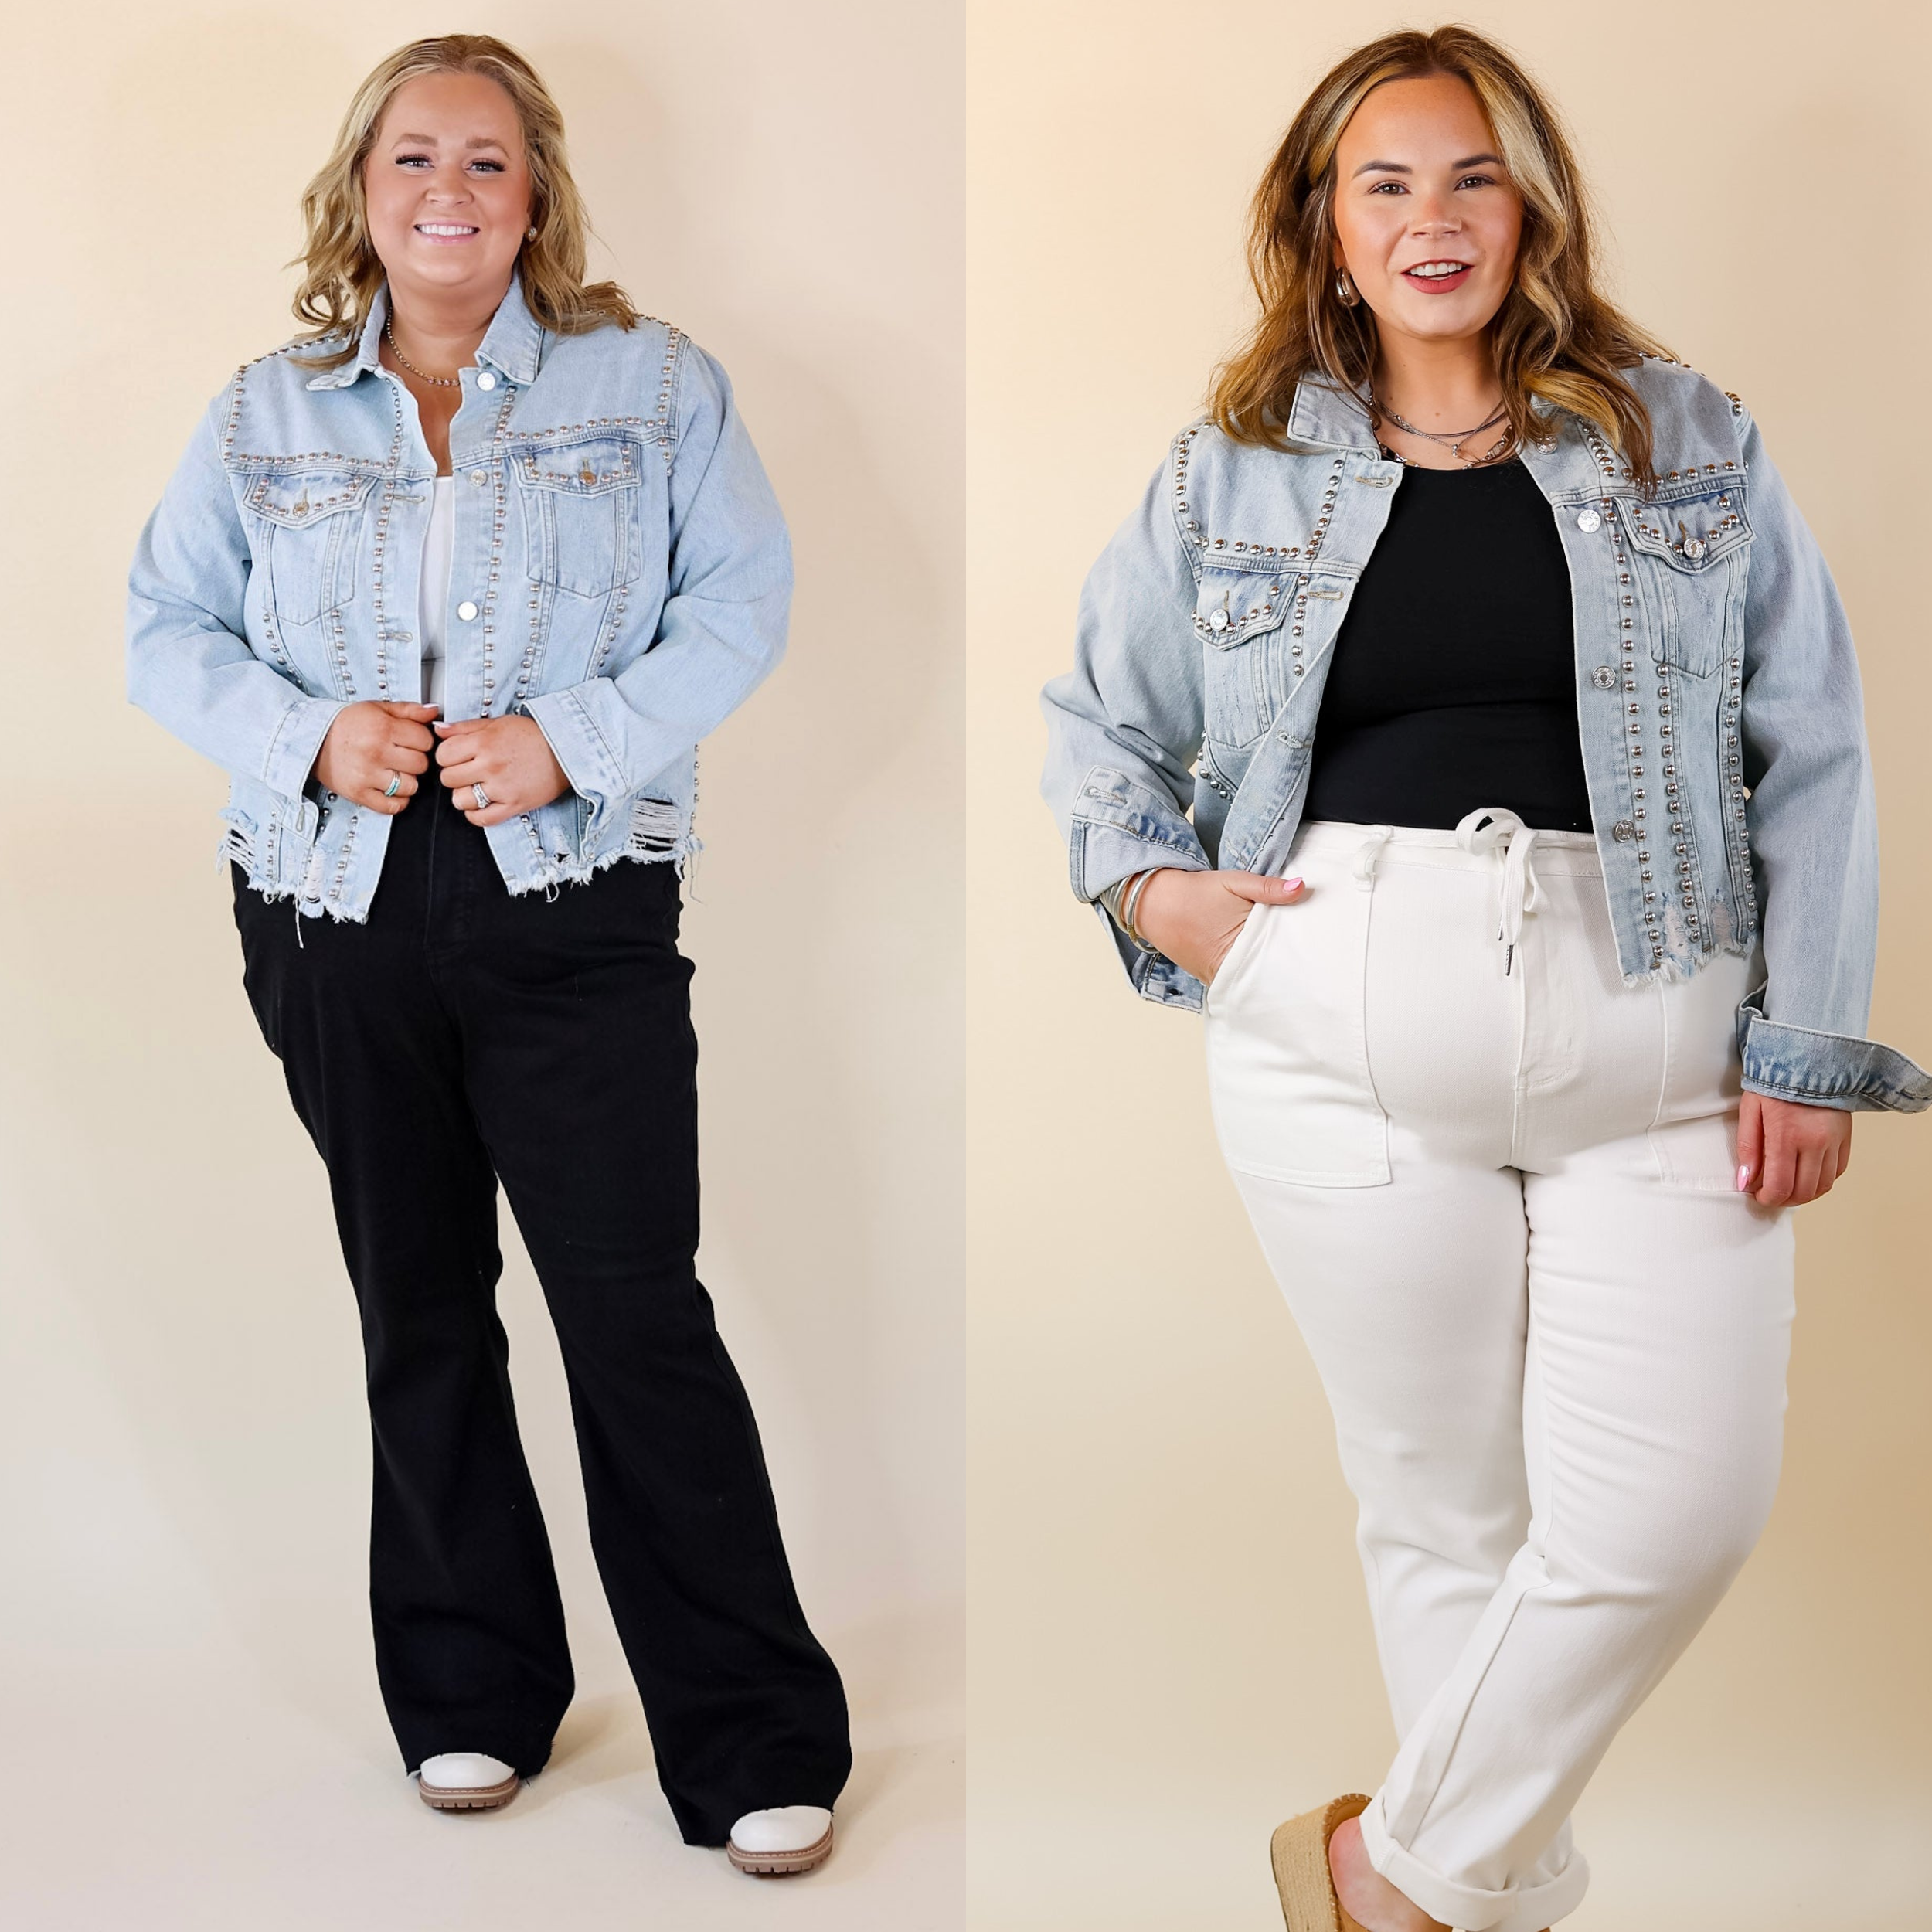 Instantly Impressed Cropped Denim Jacket with Silver Studs in Light Wash - Giddy Up Glamour Boutique